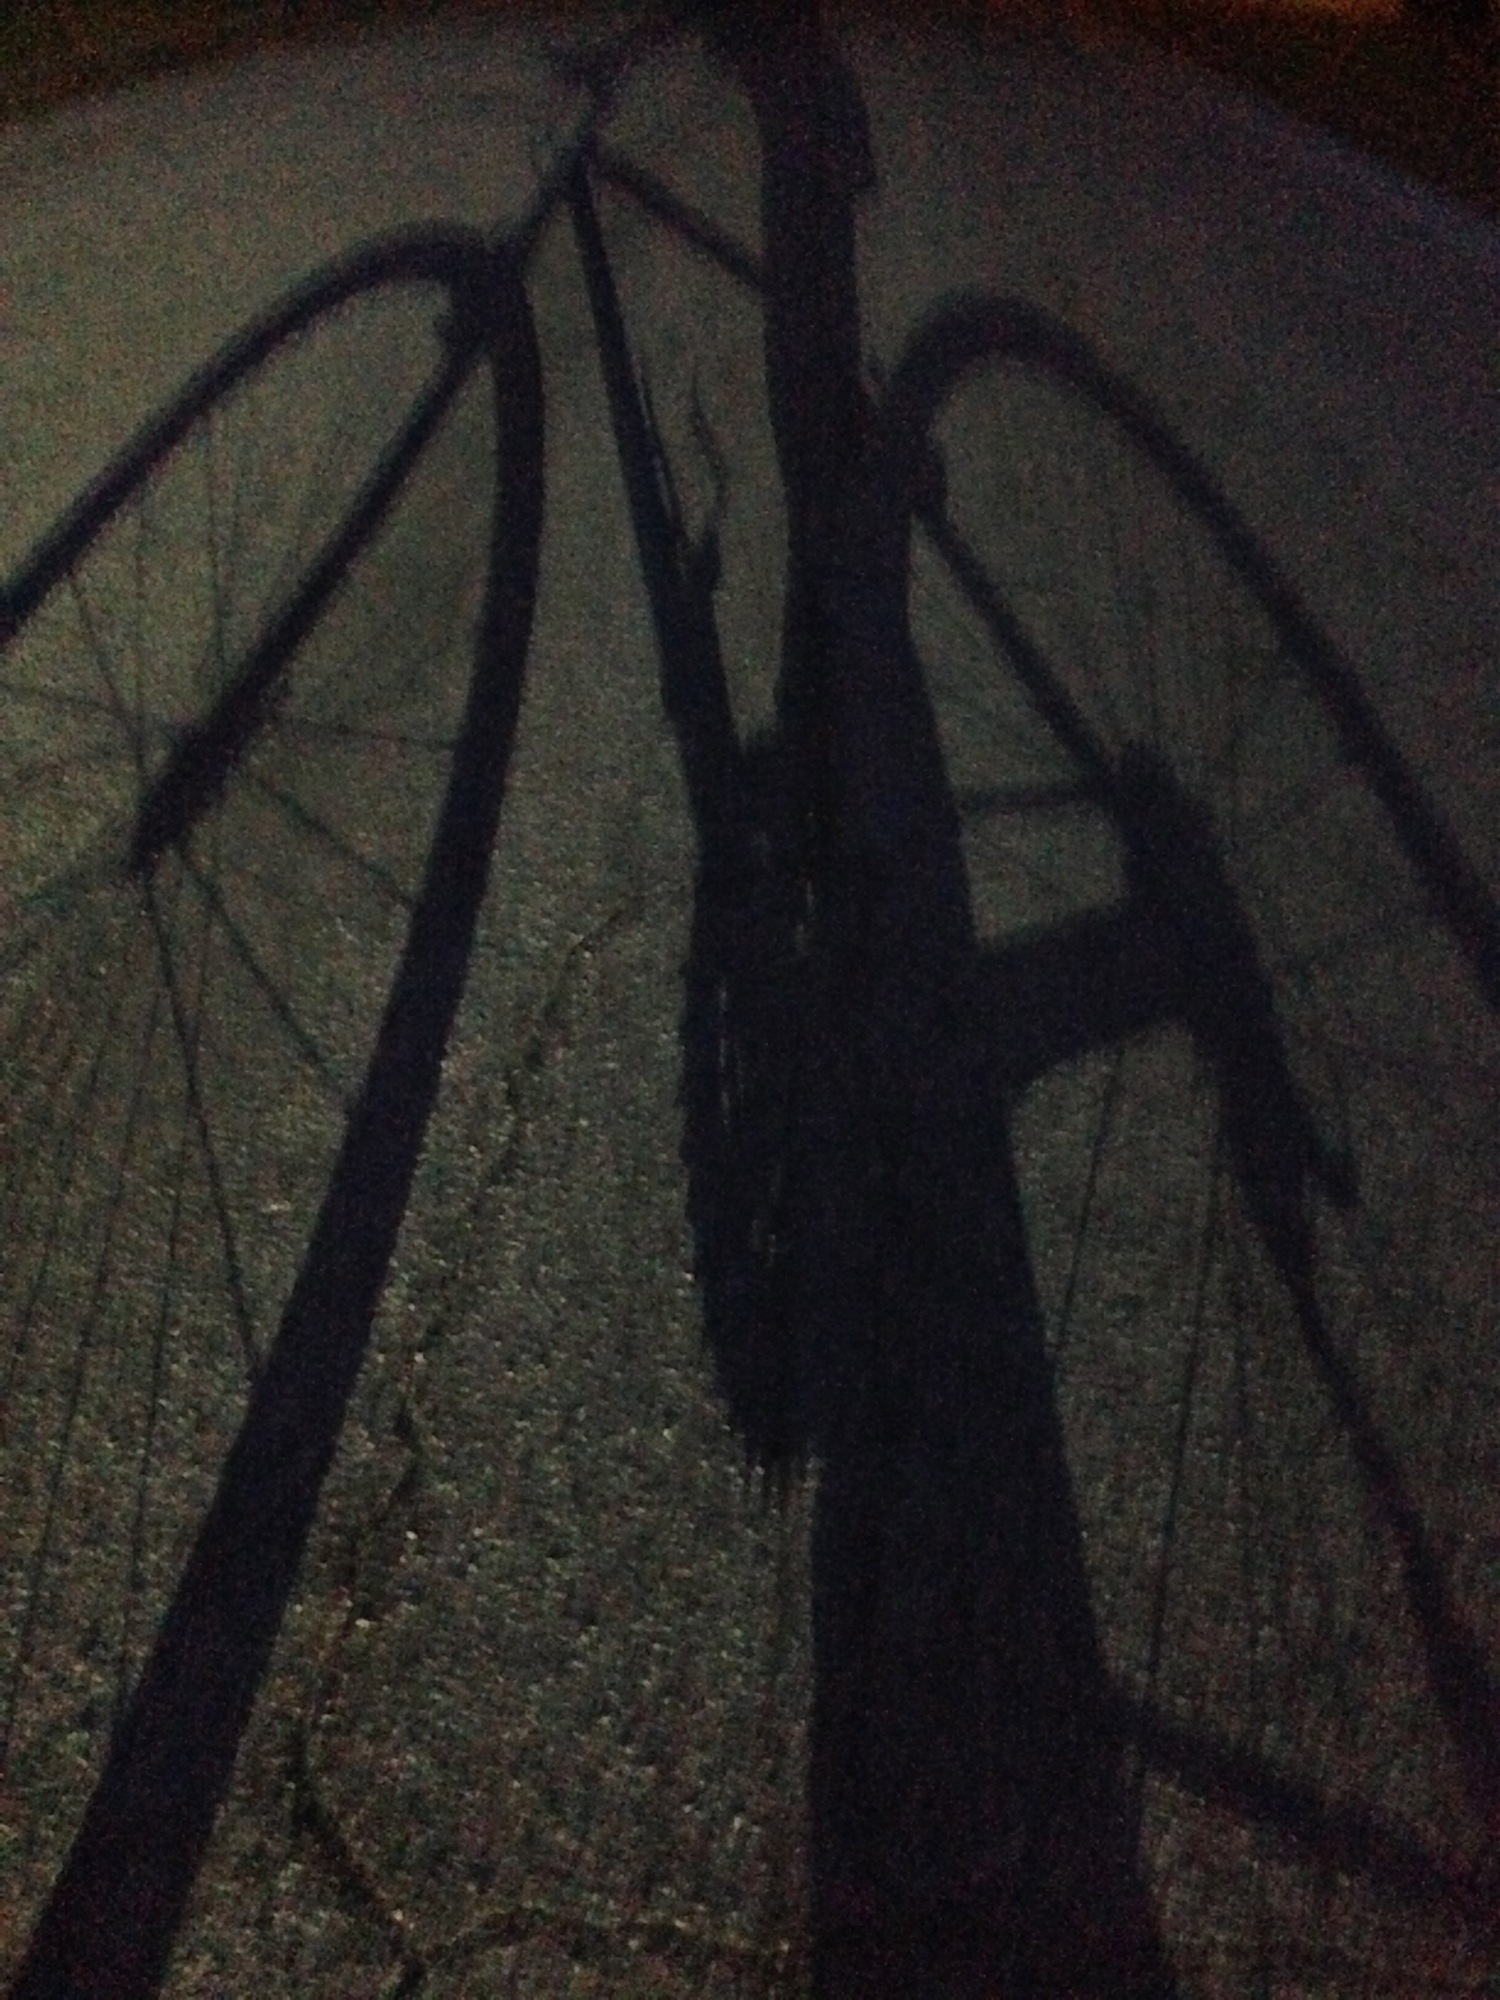 This is a picture of the shadow of her dad's bike.